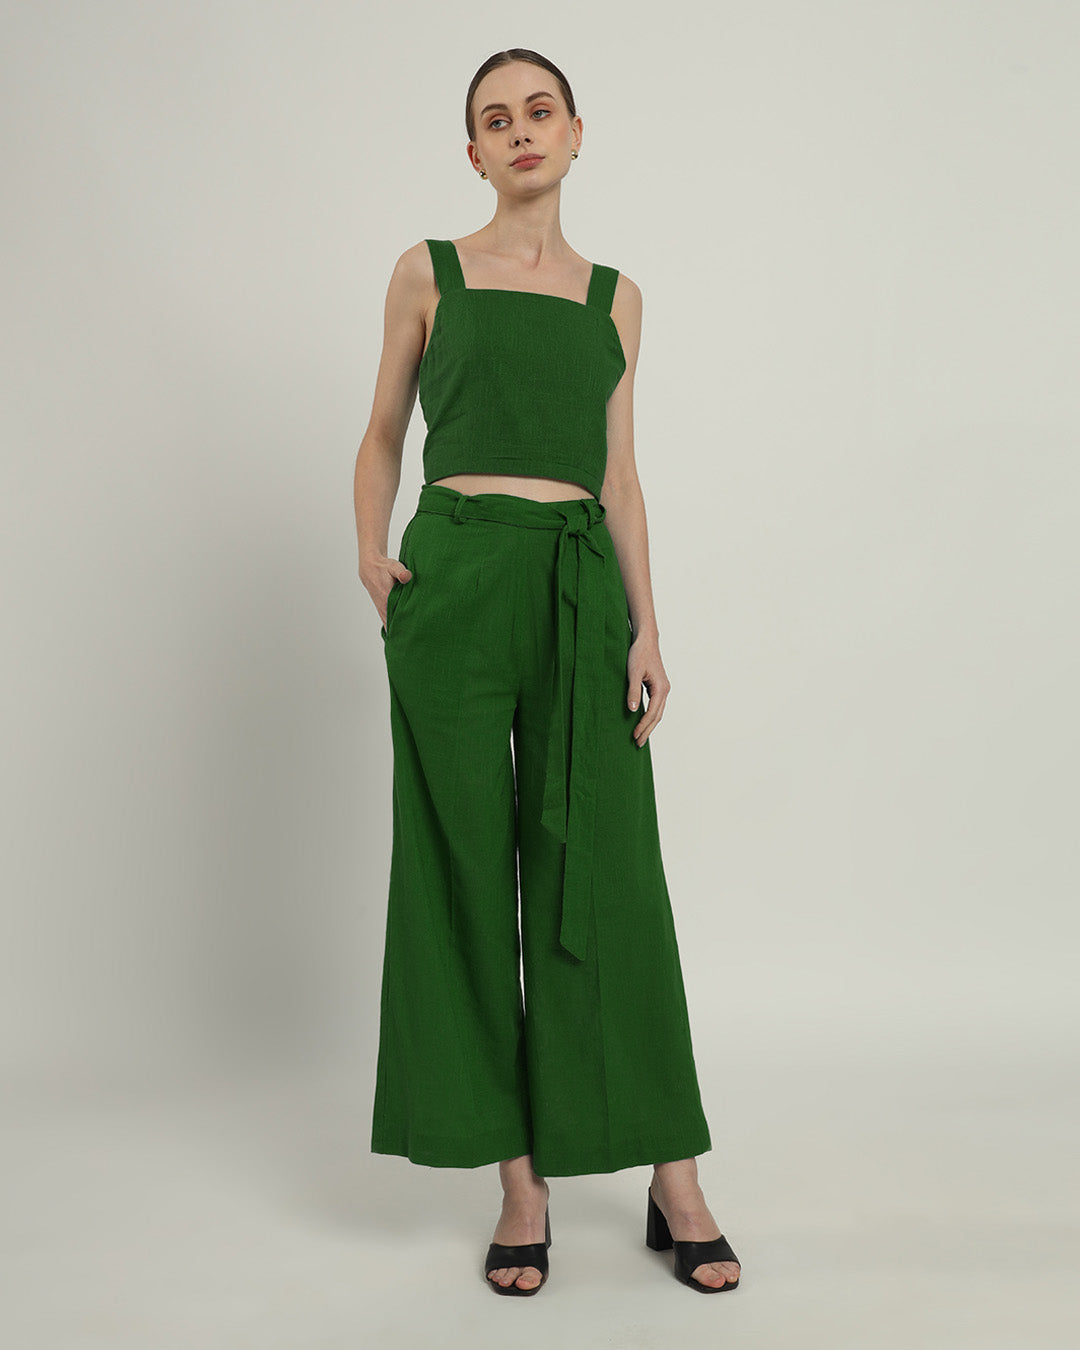 Sleek Square Crop Solid Emerald Top (Without Bottoms)